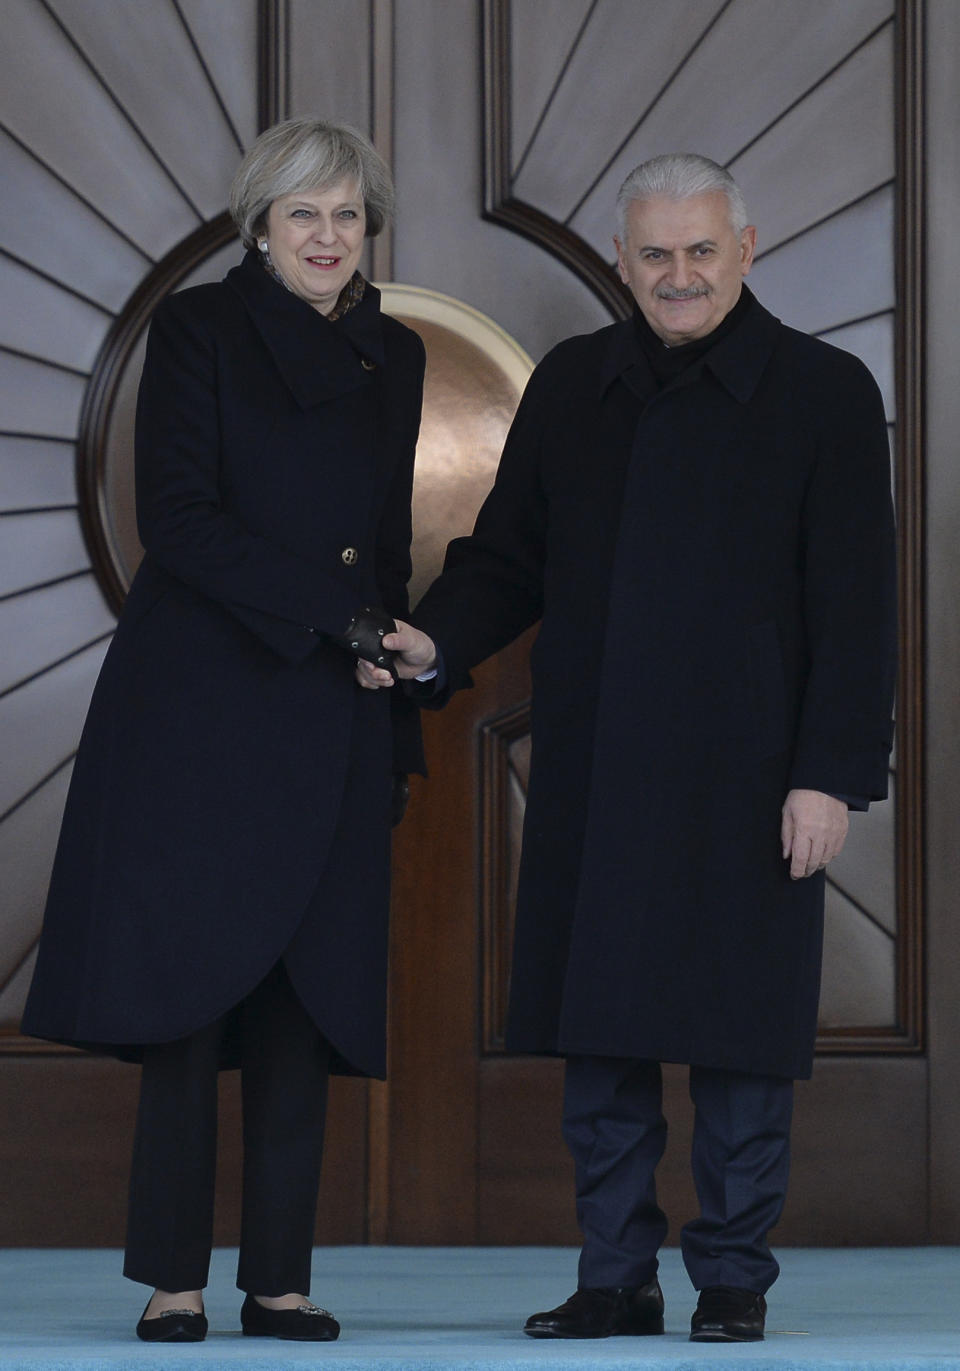 Turkey's Prime Minister Binali Yildirim, right, shakes hands with British Prime Minister Theresa May, left, prior to their meeting in Ankara, Turkey, Saturday, Jan. 28, 2017. May on Saturday urged Turkey to sustain its democracy and abide by human rights standards during her meeting with Turkish President Recep Tayyip Erdogan that also drew promises of closer defense cooperation between the two NATO allies. (AP Photo)